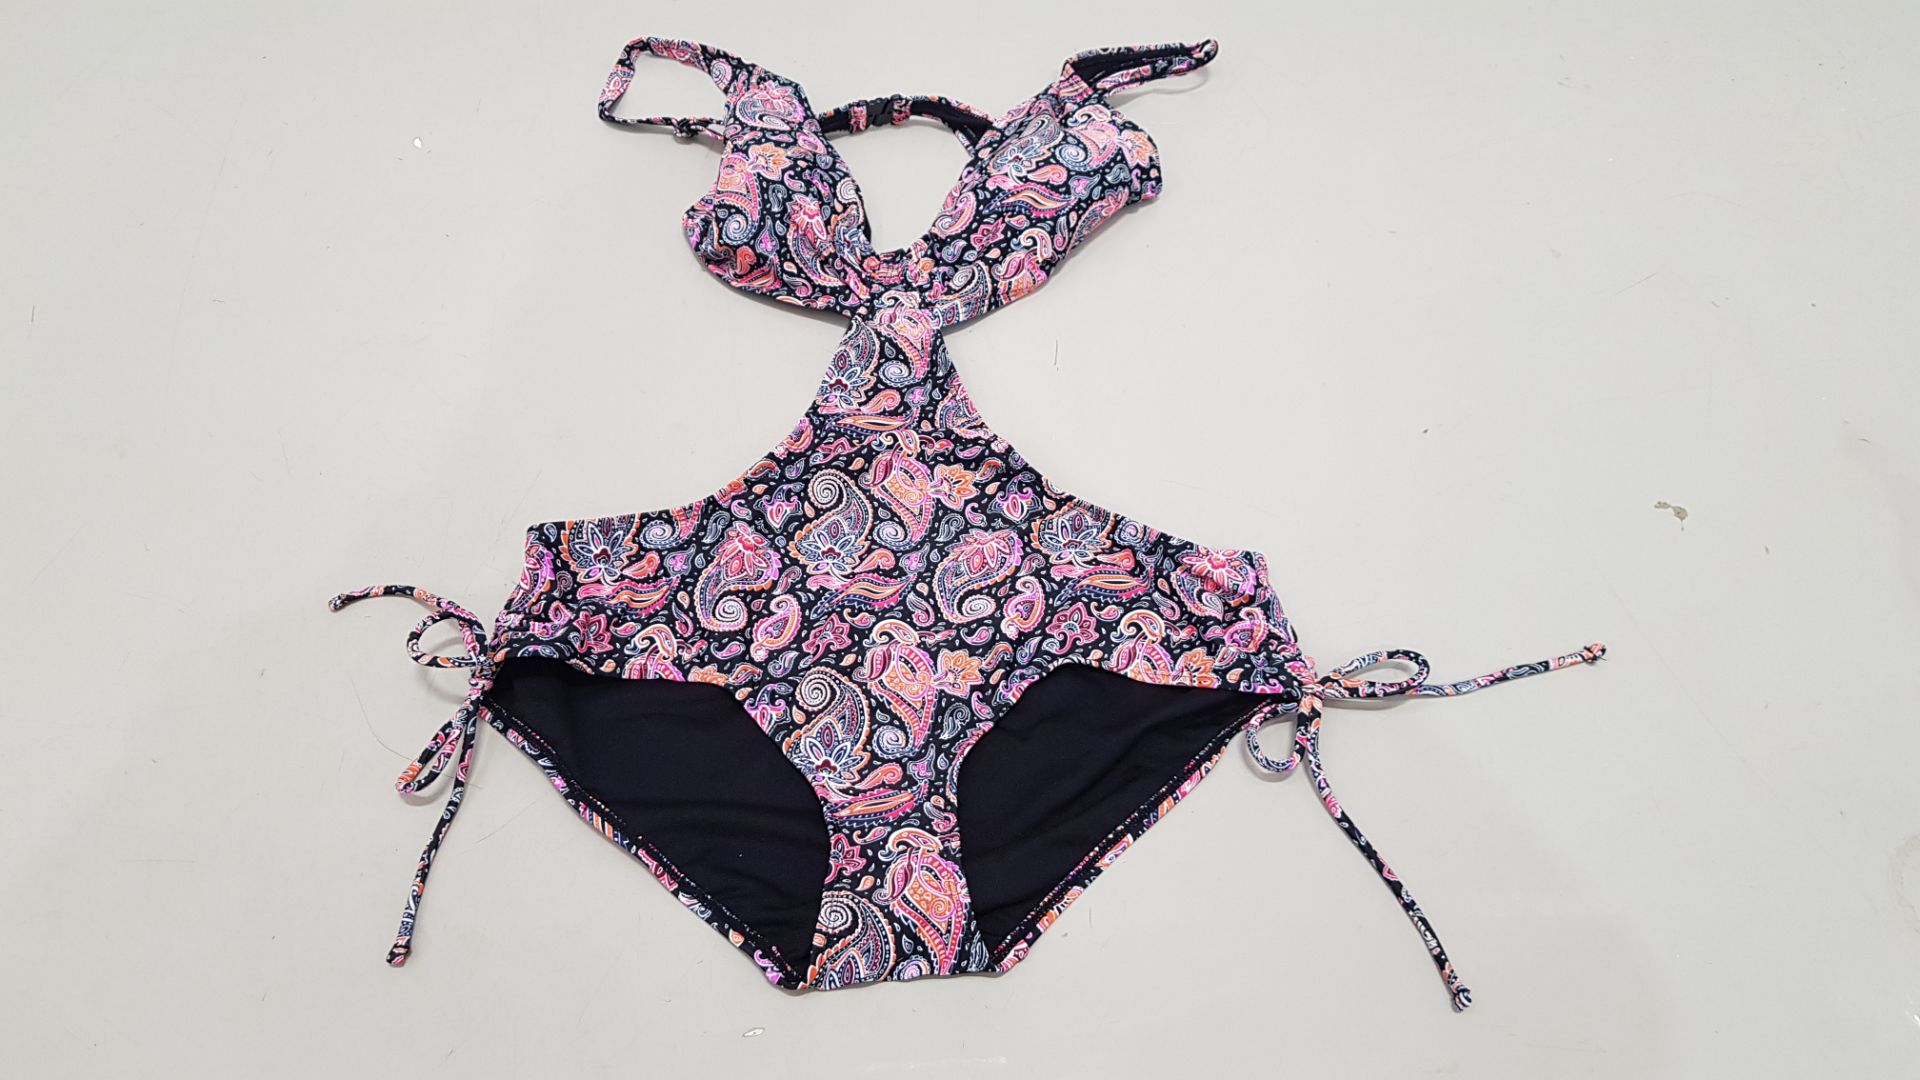 20 X BRAND NEW GEORGE 1 PIECE BODY SWIM SUITS - ALL IN FLORAL PRINT - IN MIXED SIZES TO INCLUDE UK